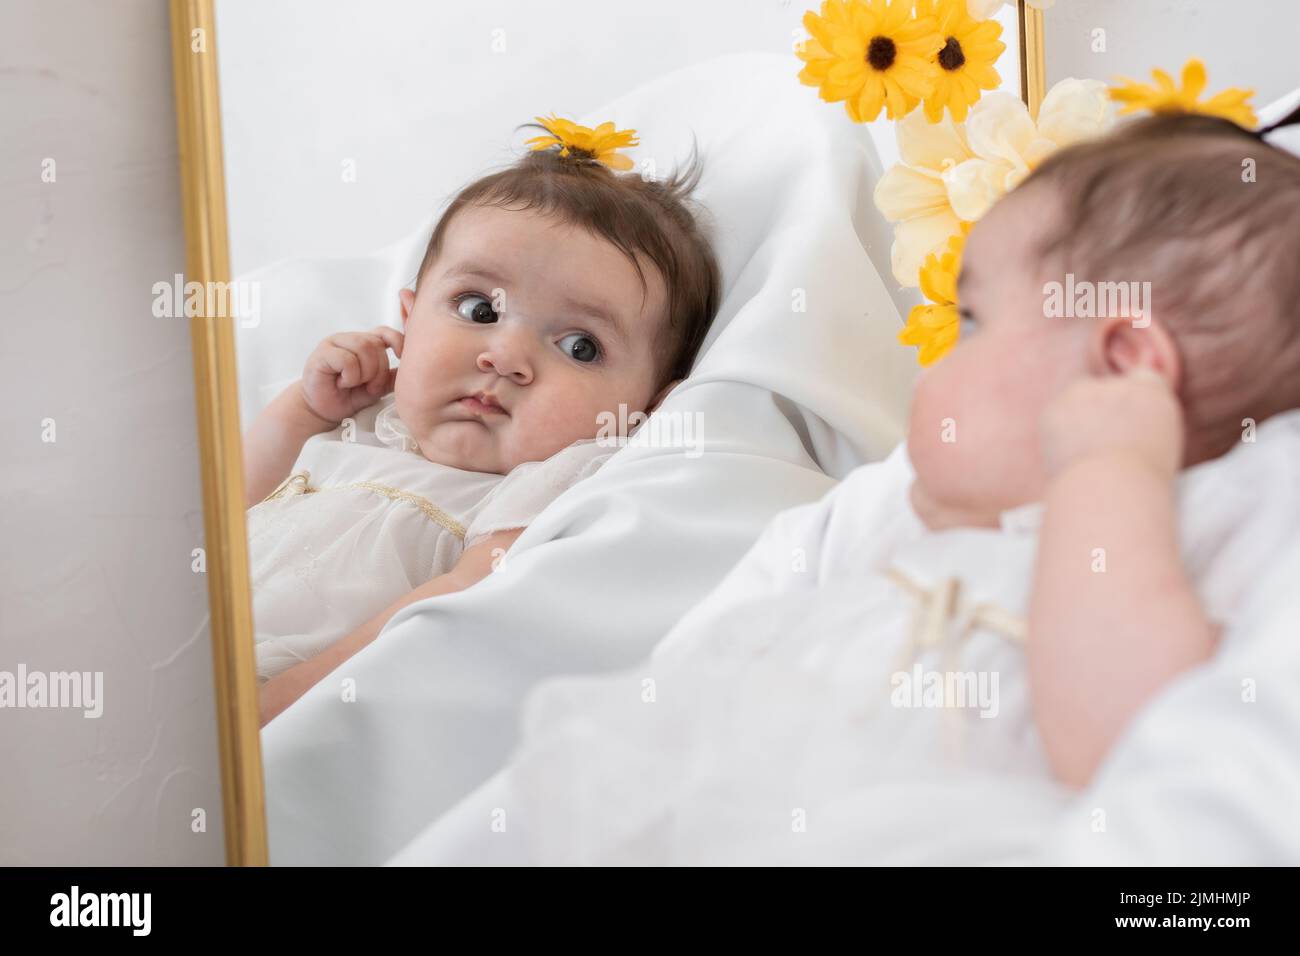 close-up of a beautiful latina baby girl, looking at her reflection in the mirror for the first time, touching her ear with her hand while looking ver Stock Photo